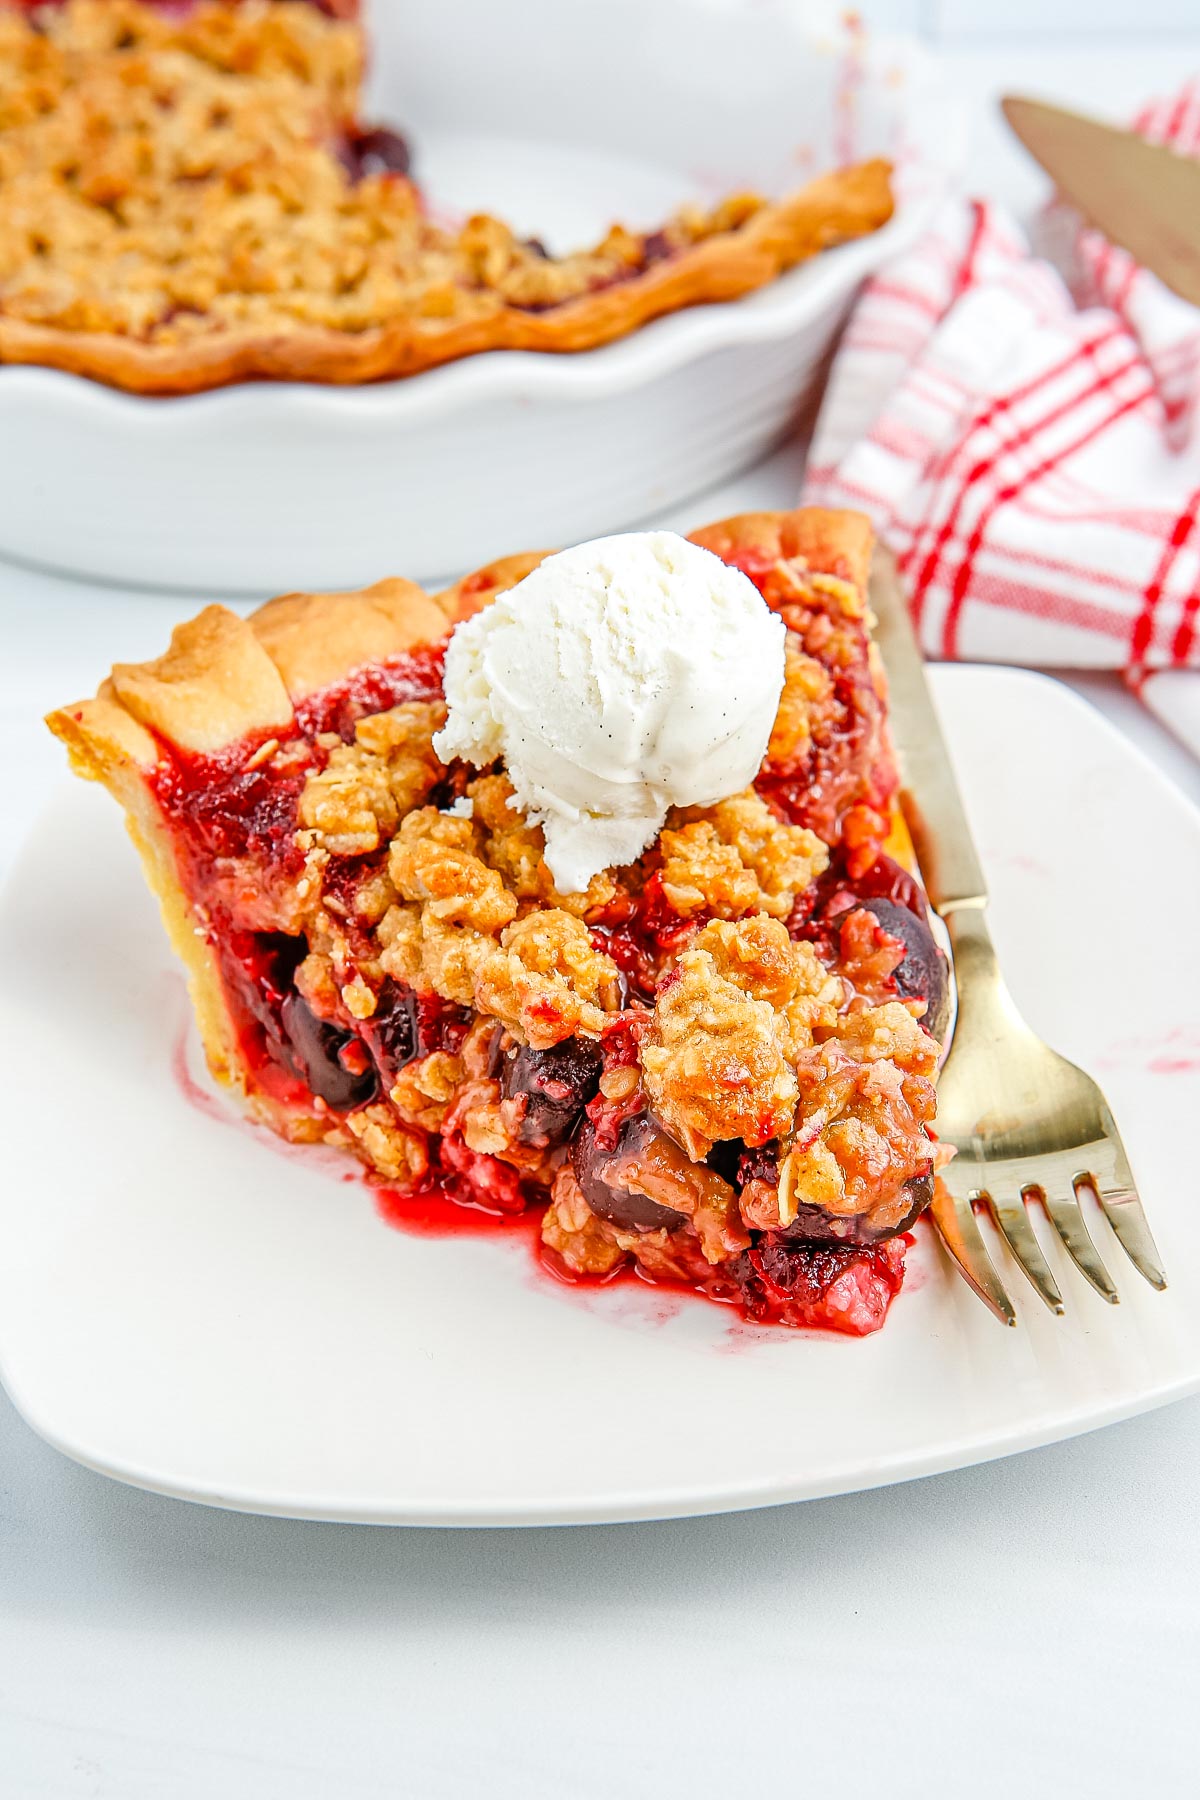 A sliced of the finished Cherry Crumble Pie on a white plate with a scoop of ice cream on top.